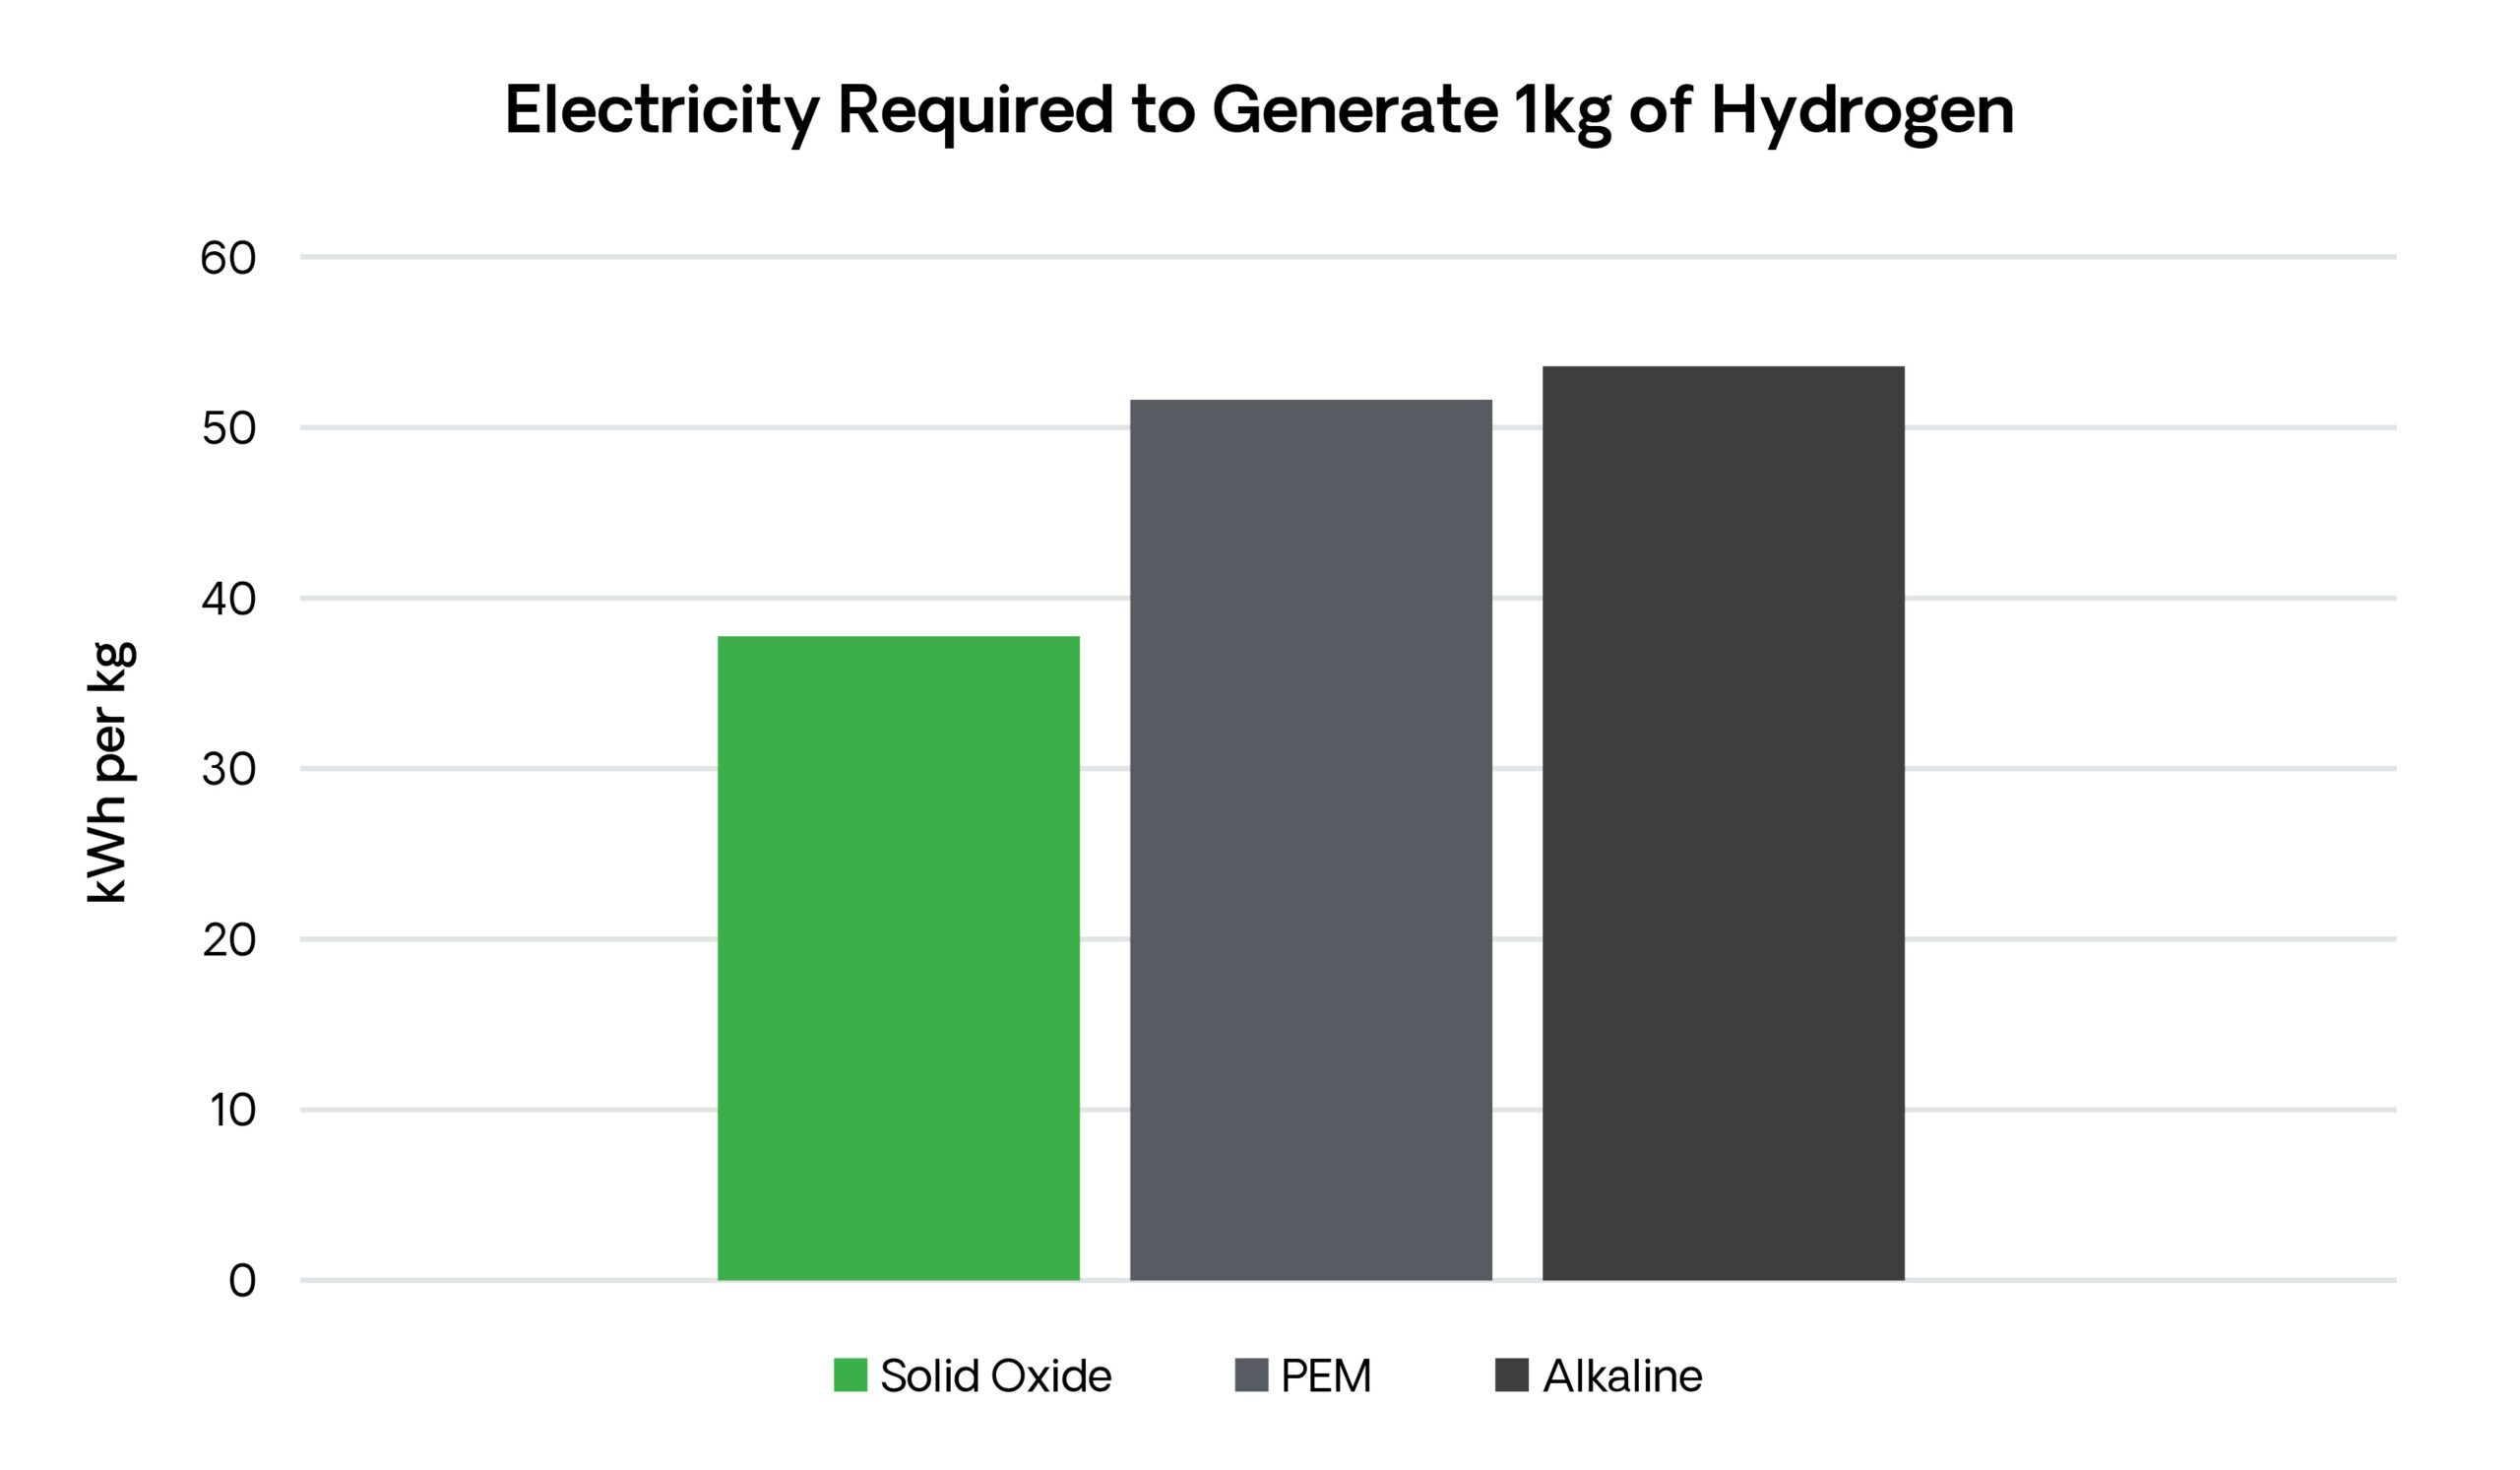 Electricity Required to Generate 1kg of Hydrogen